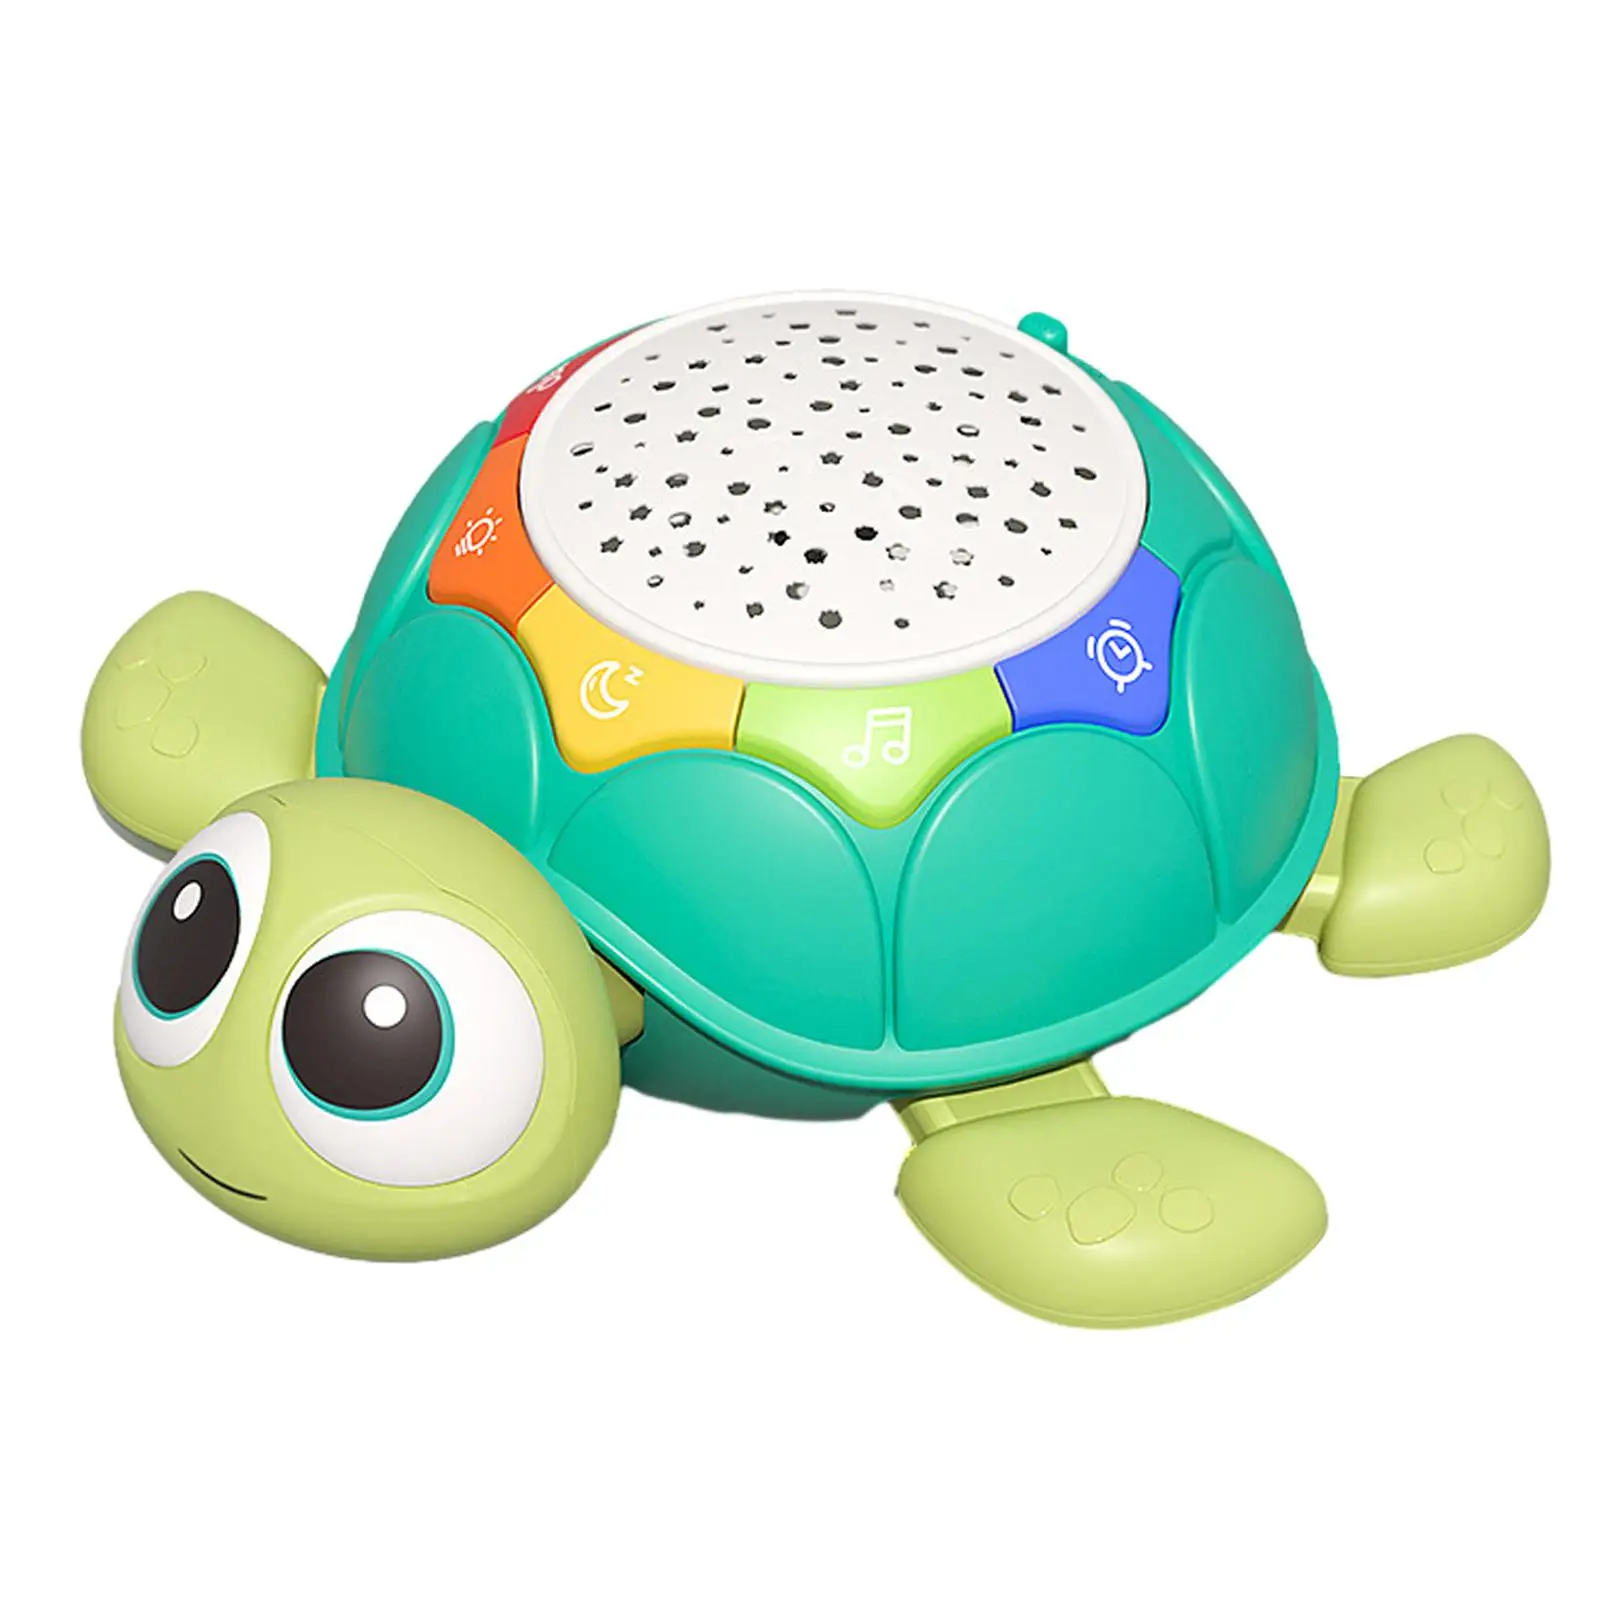 Turtle Crawling Musical Baby Toys with Timer Early Developmental Toys Birthday Gift Light up for Girls Boys 7 8 9 Month Baby